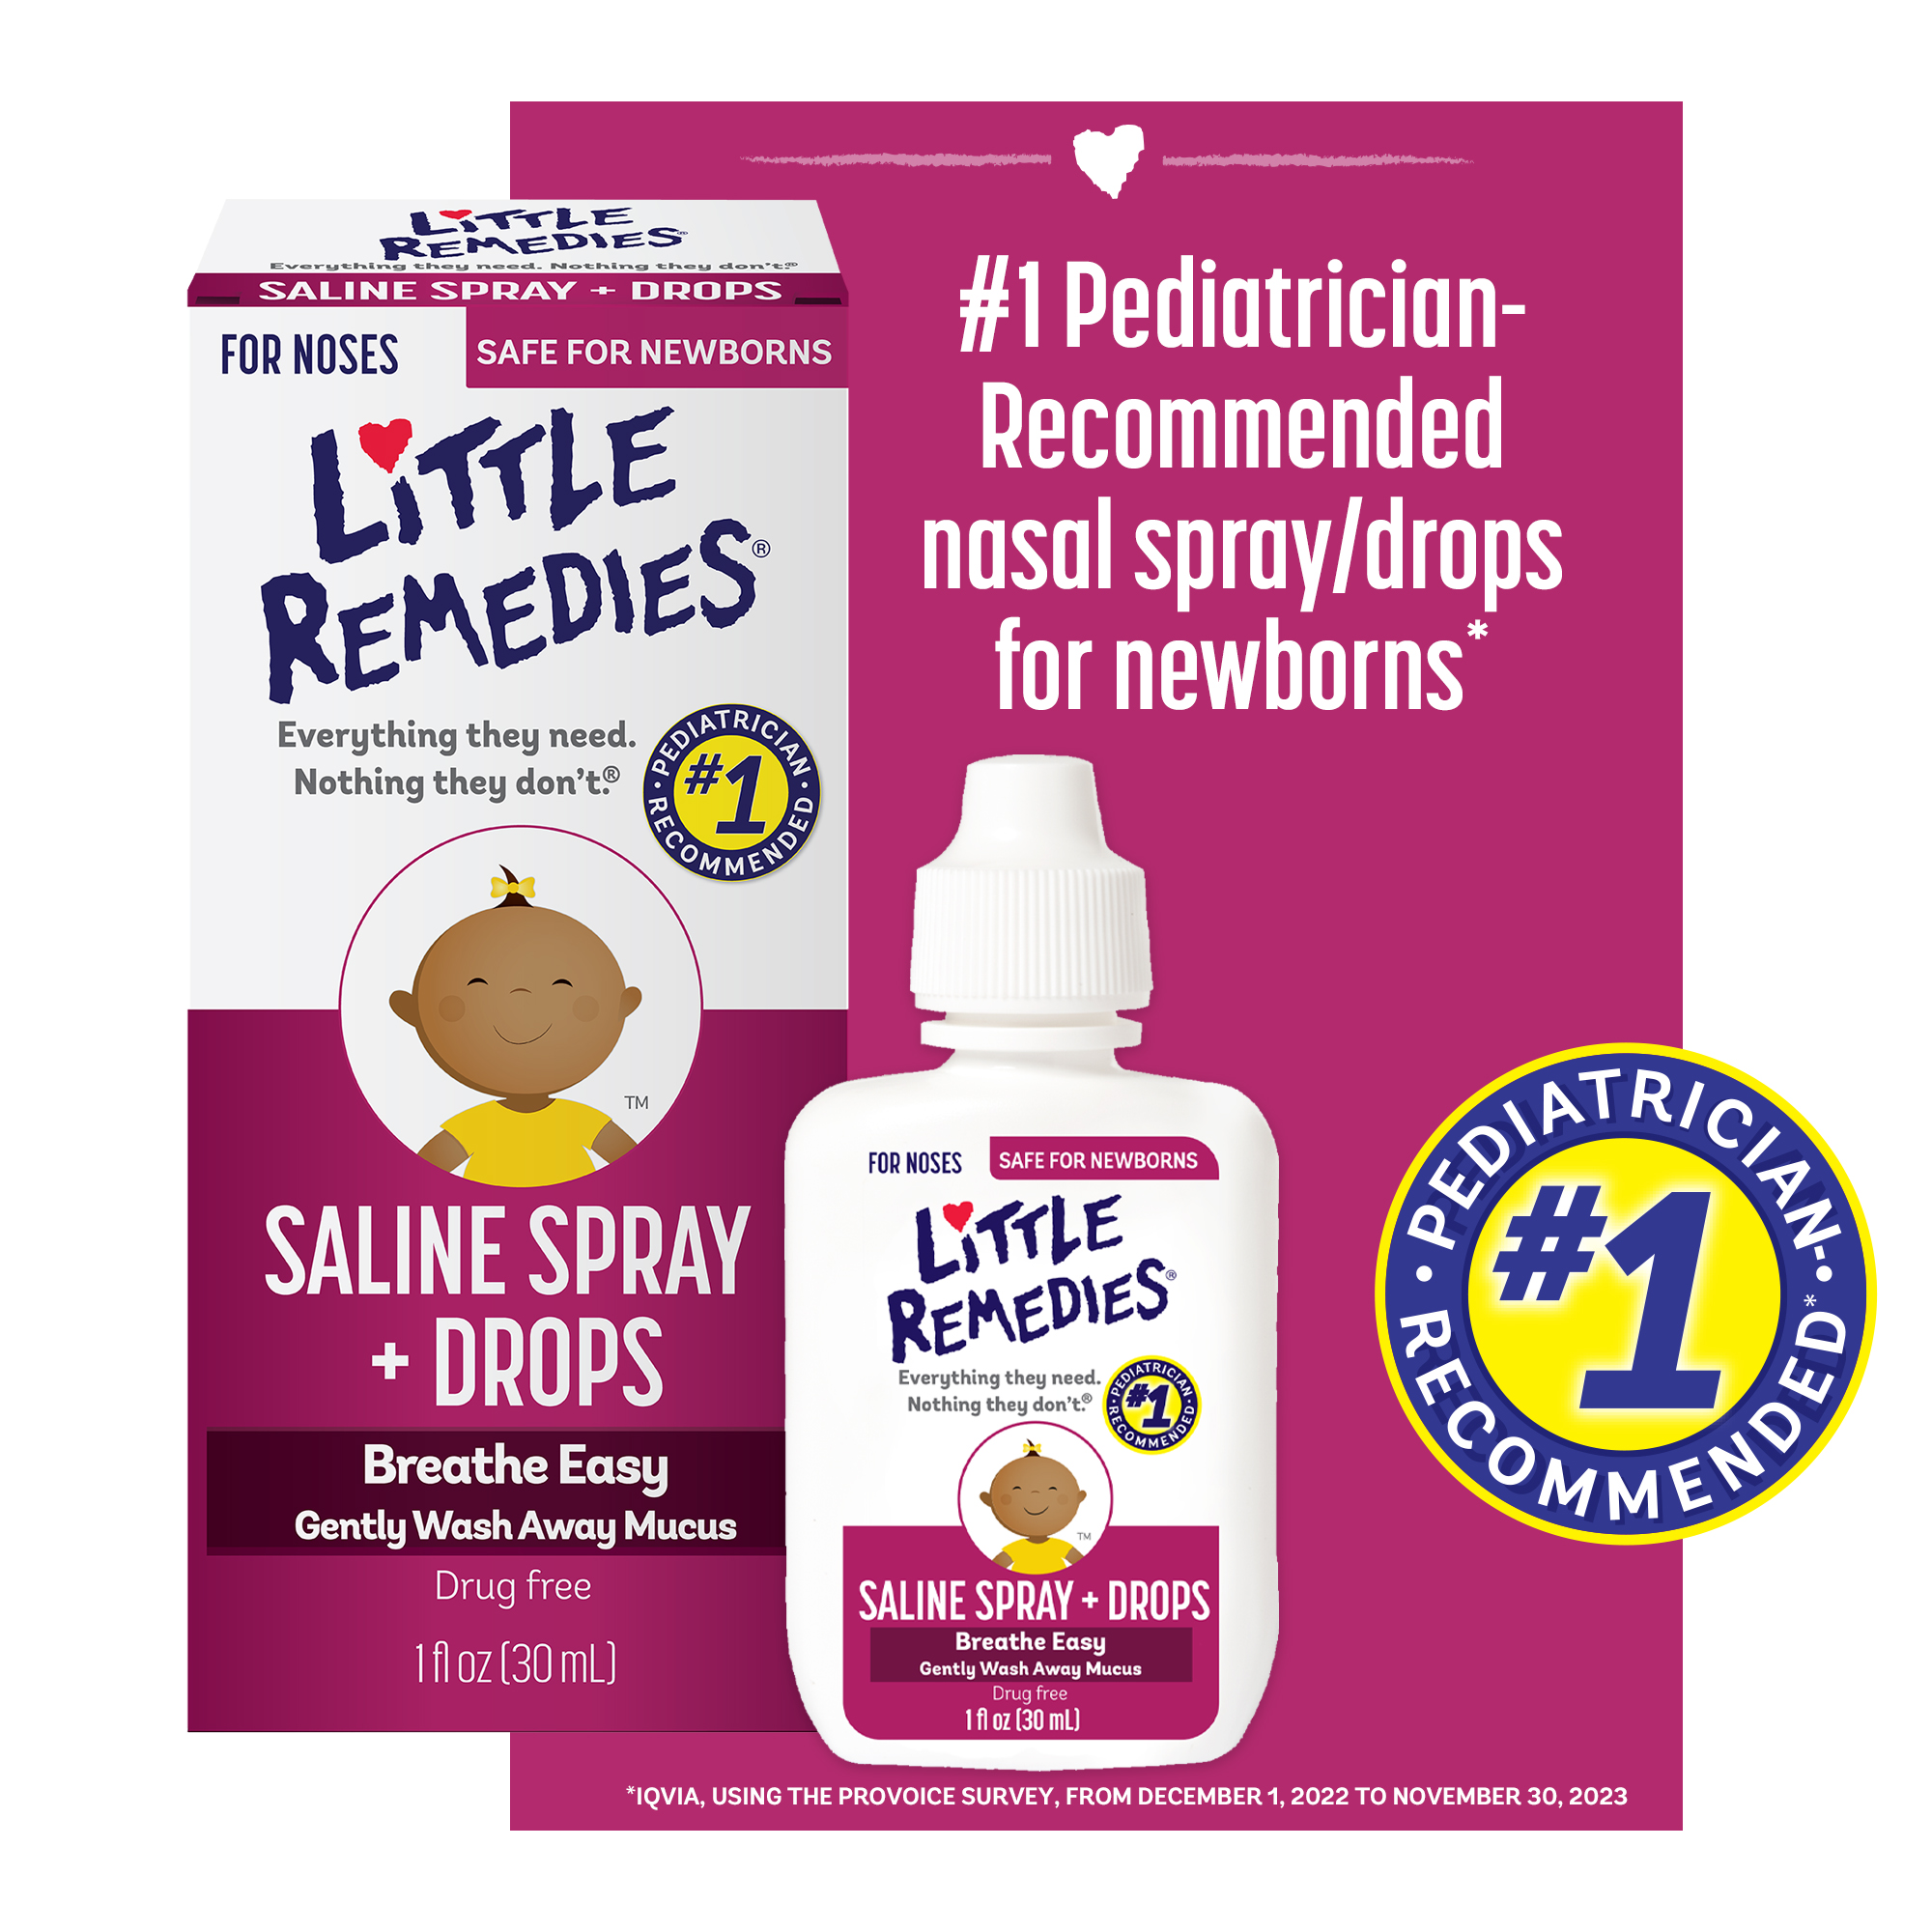 Little Remedies Saline Spray and Drops, Safe for Newborns, 1 fl oz - image 1 of 16